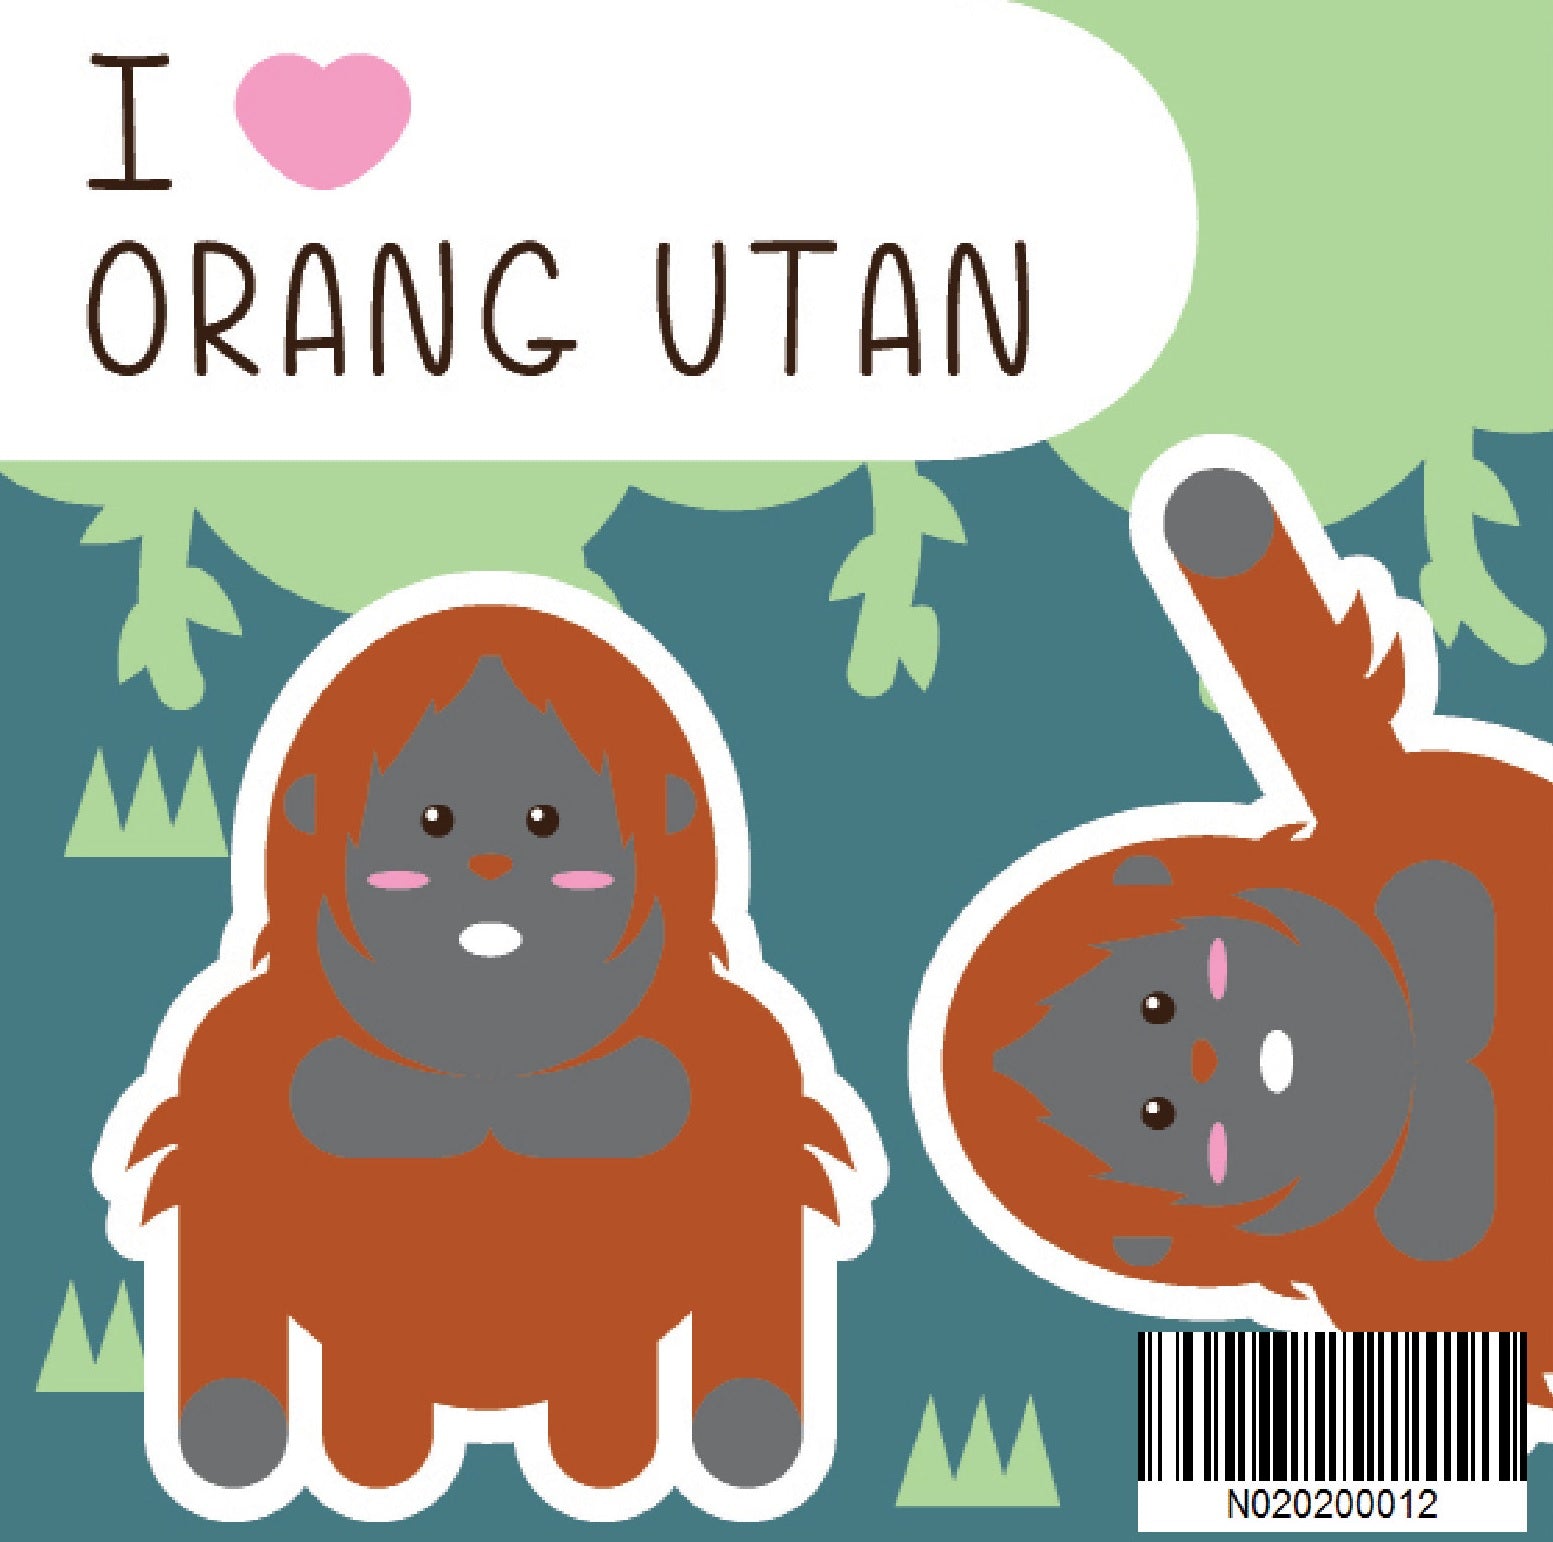 N02020012 I Love Orang Utan Malaysia Series Small Size Number Painting (20x20cm)